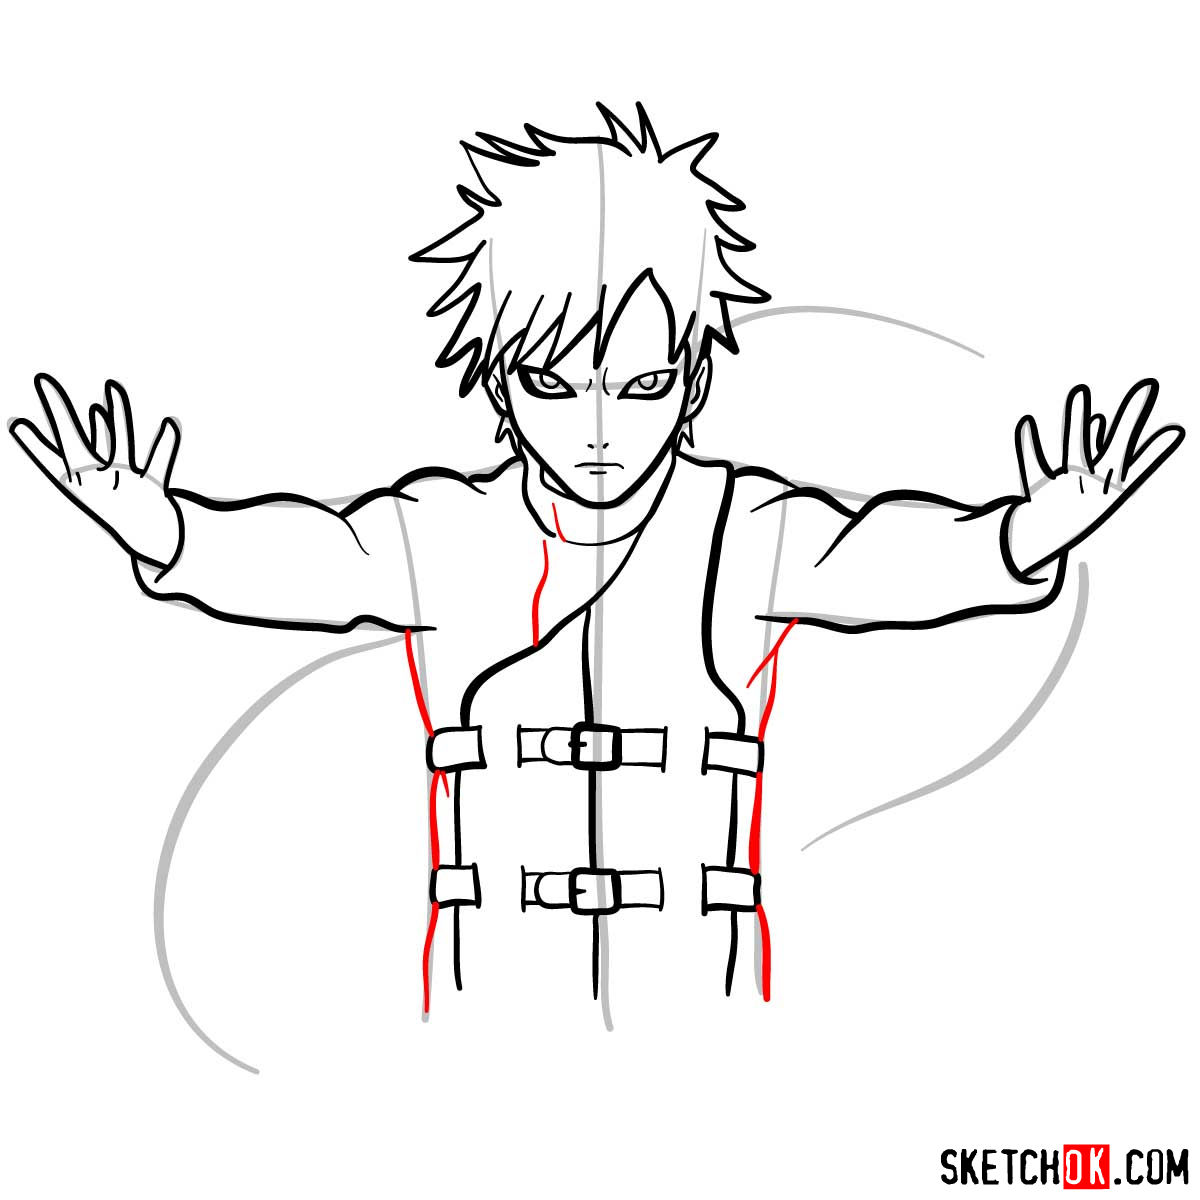 How to draw Gaara from Naruto anime - step 10